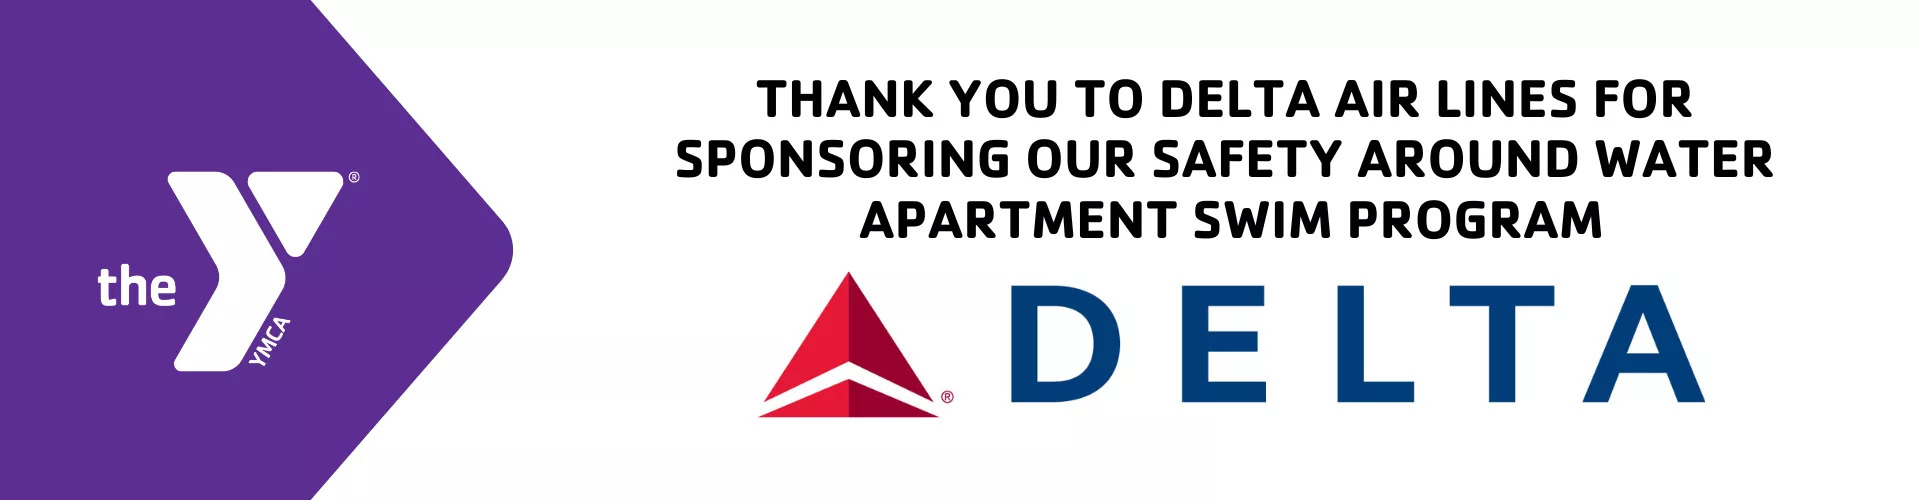 THANK YOU TO DELTA AIR LINES FOR  SPONSORING OUR SAFETY AROUND WATER  APARTMENT SWIM PROGRAM